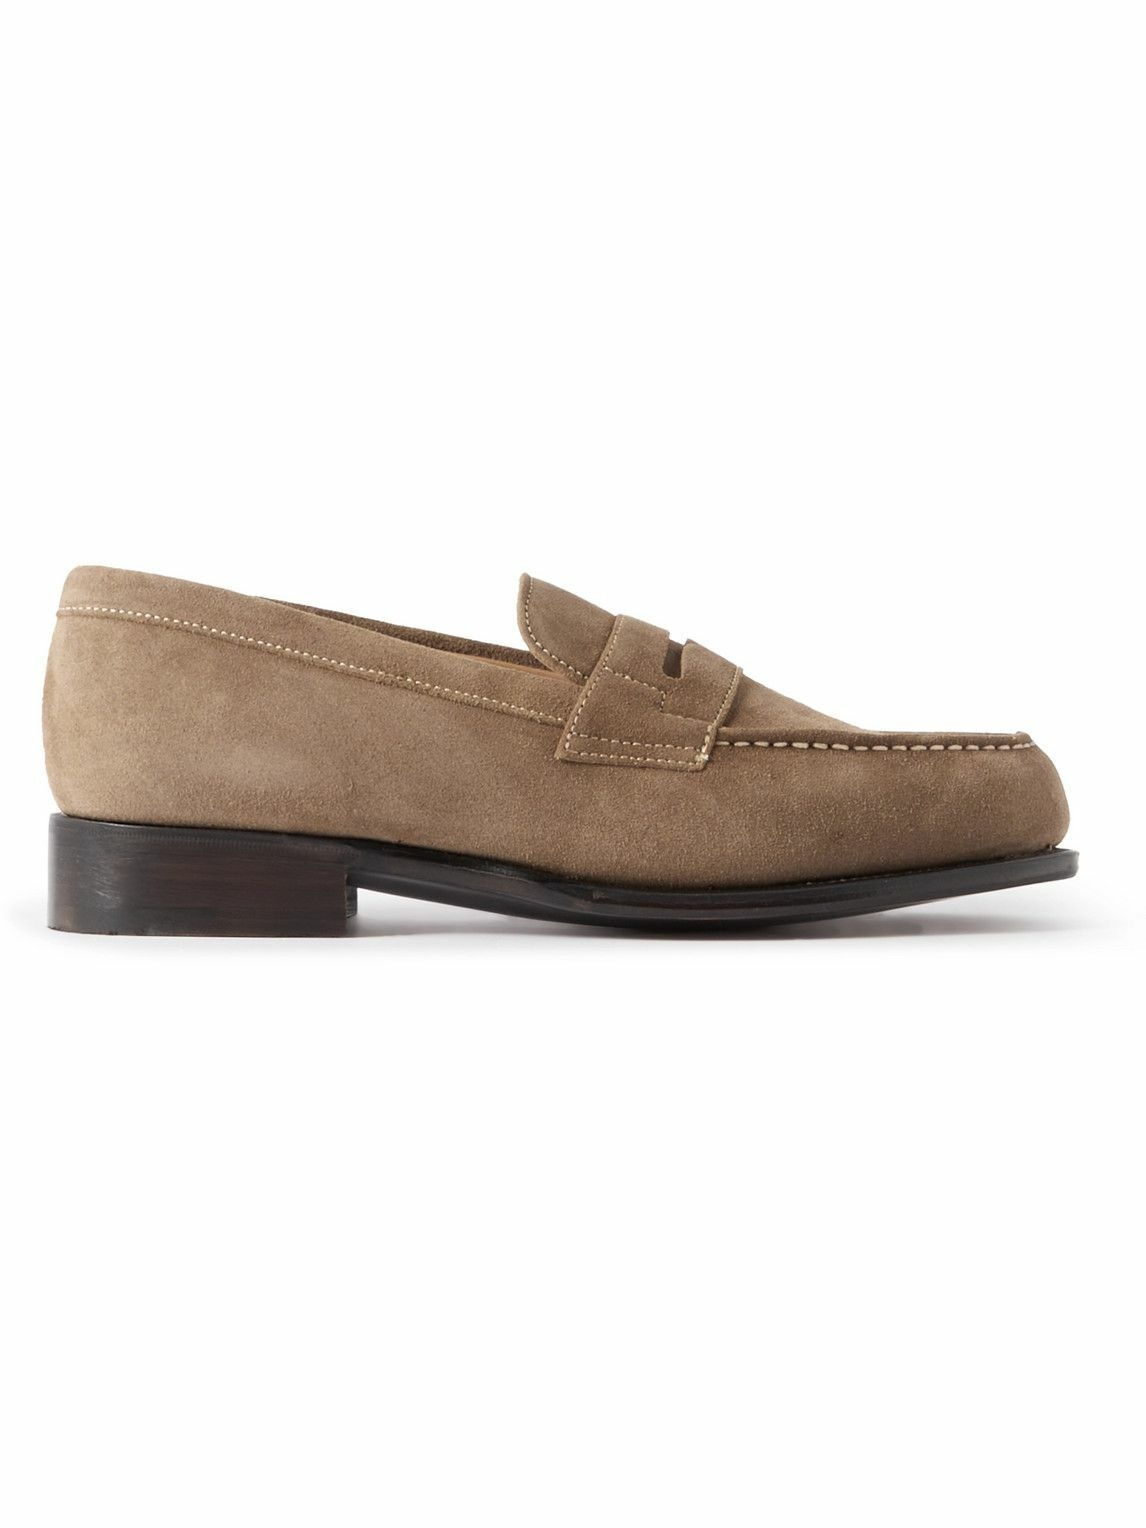 George Cleverley - Cannes Suede Penny Loafers - Neutrals George Cleverley